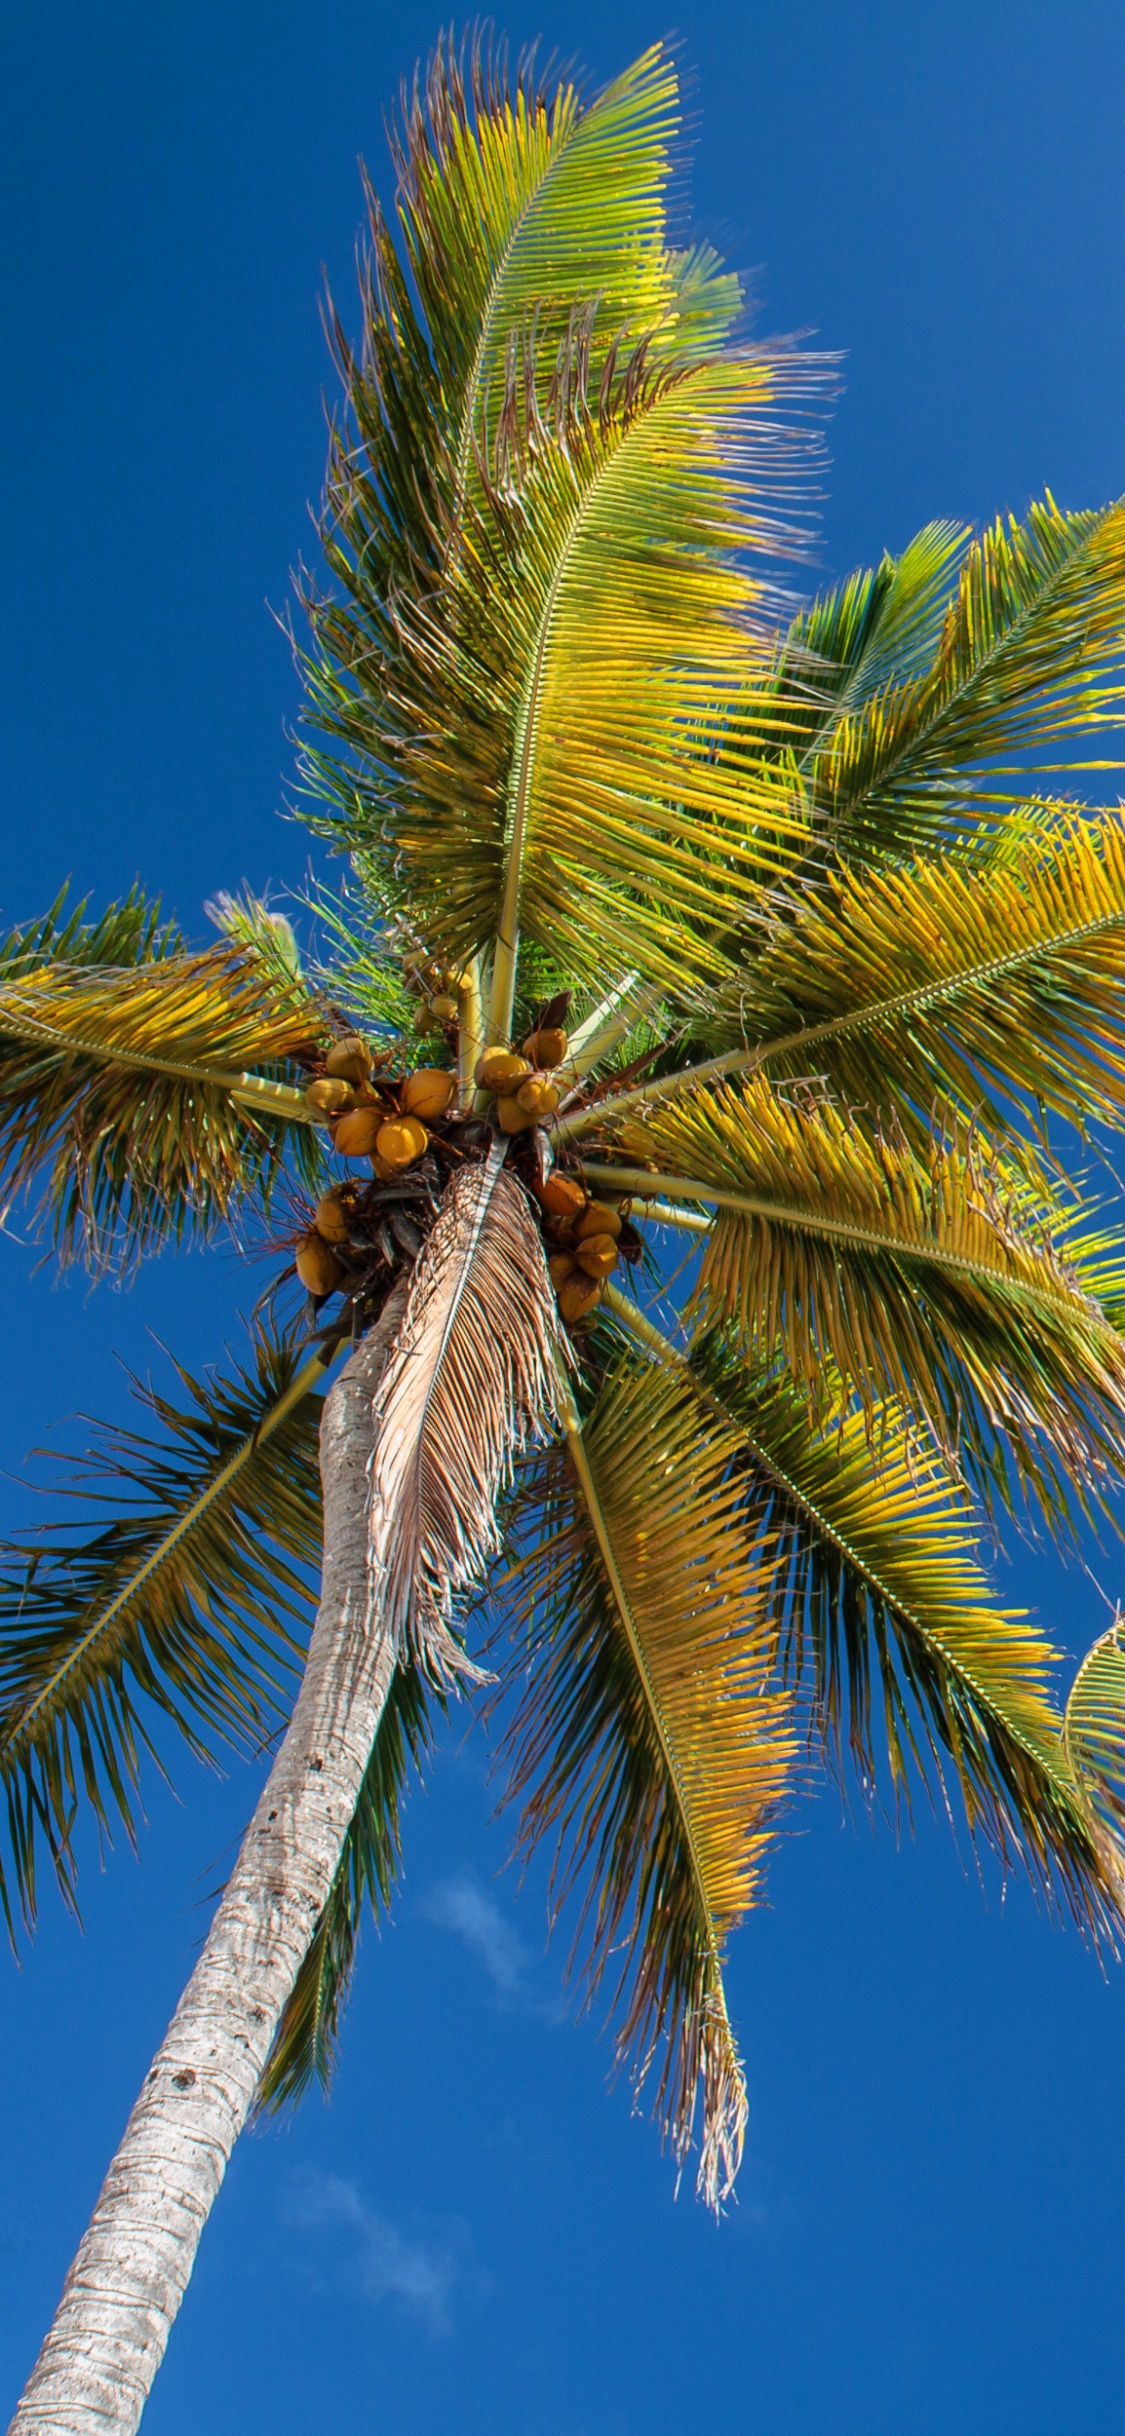 Green Palm Tree Under Blue Sky During Daytime. Wallpaper in 1125x2436 Resolution